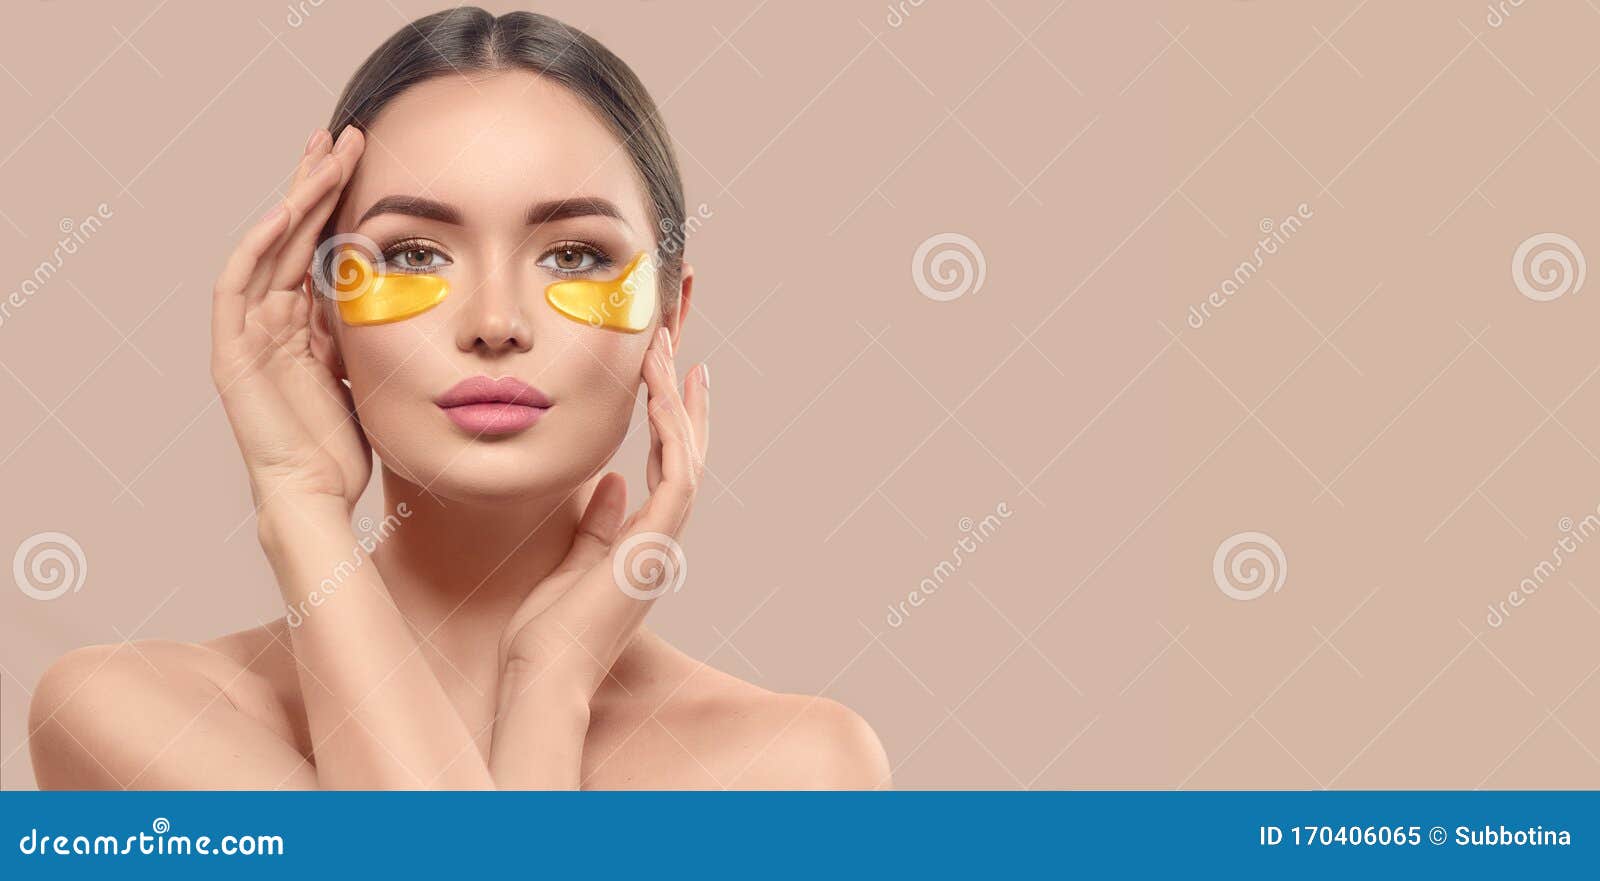 woman with under eye collagen gold pads, beauty model girl face with healthy fresh skin. skin care concept, anti-aging mask